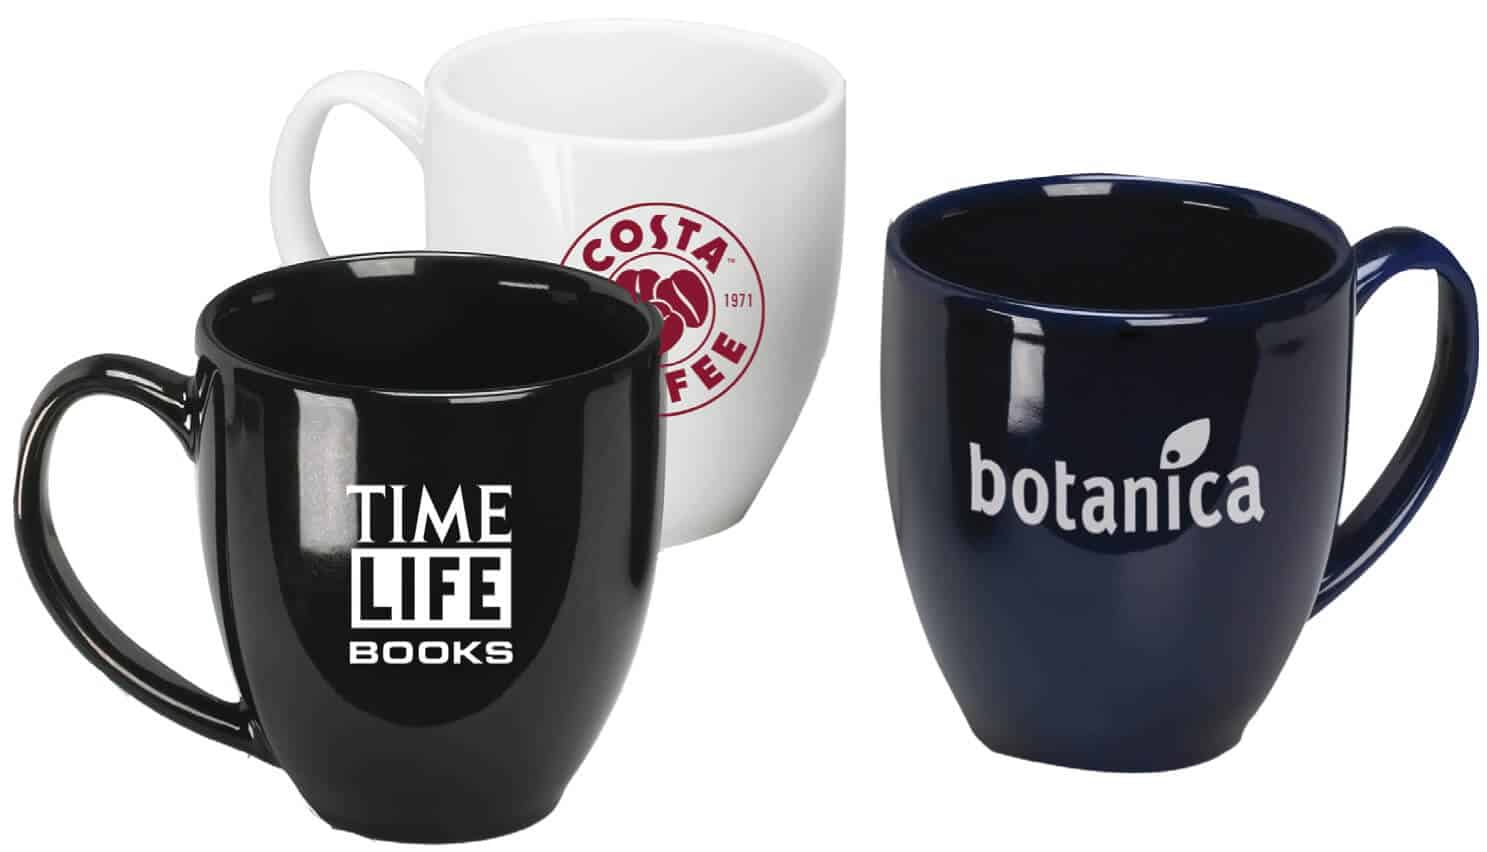 Get your logo on cups, mugs and coozies